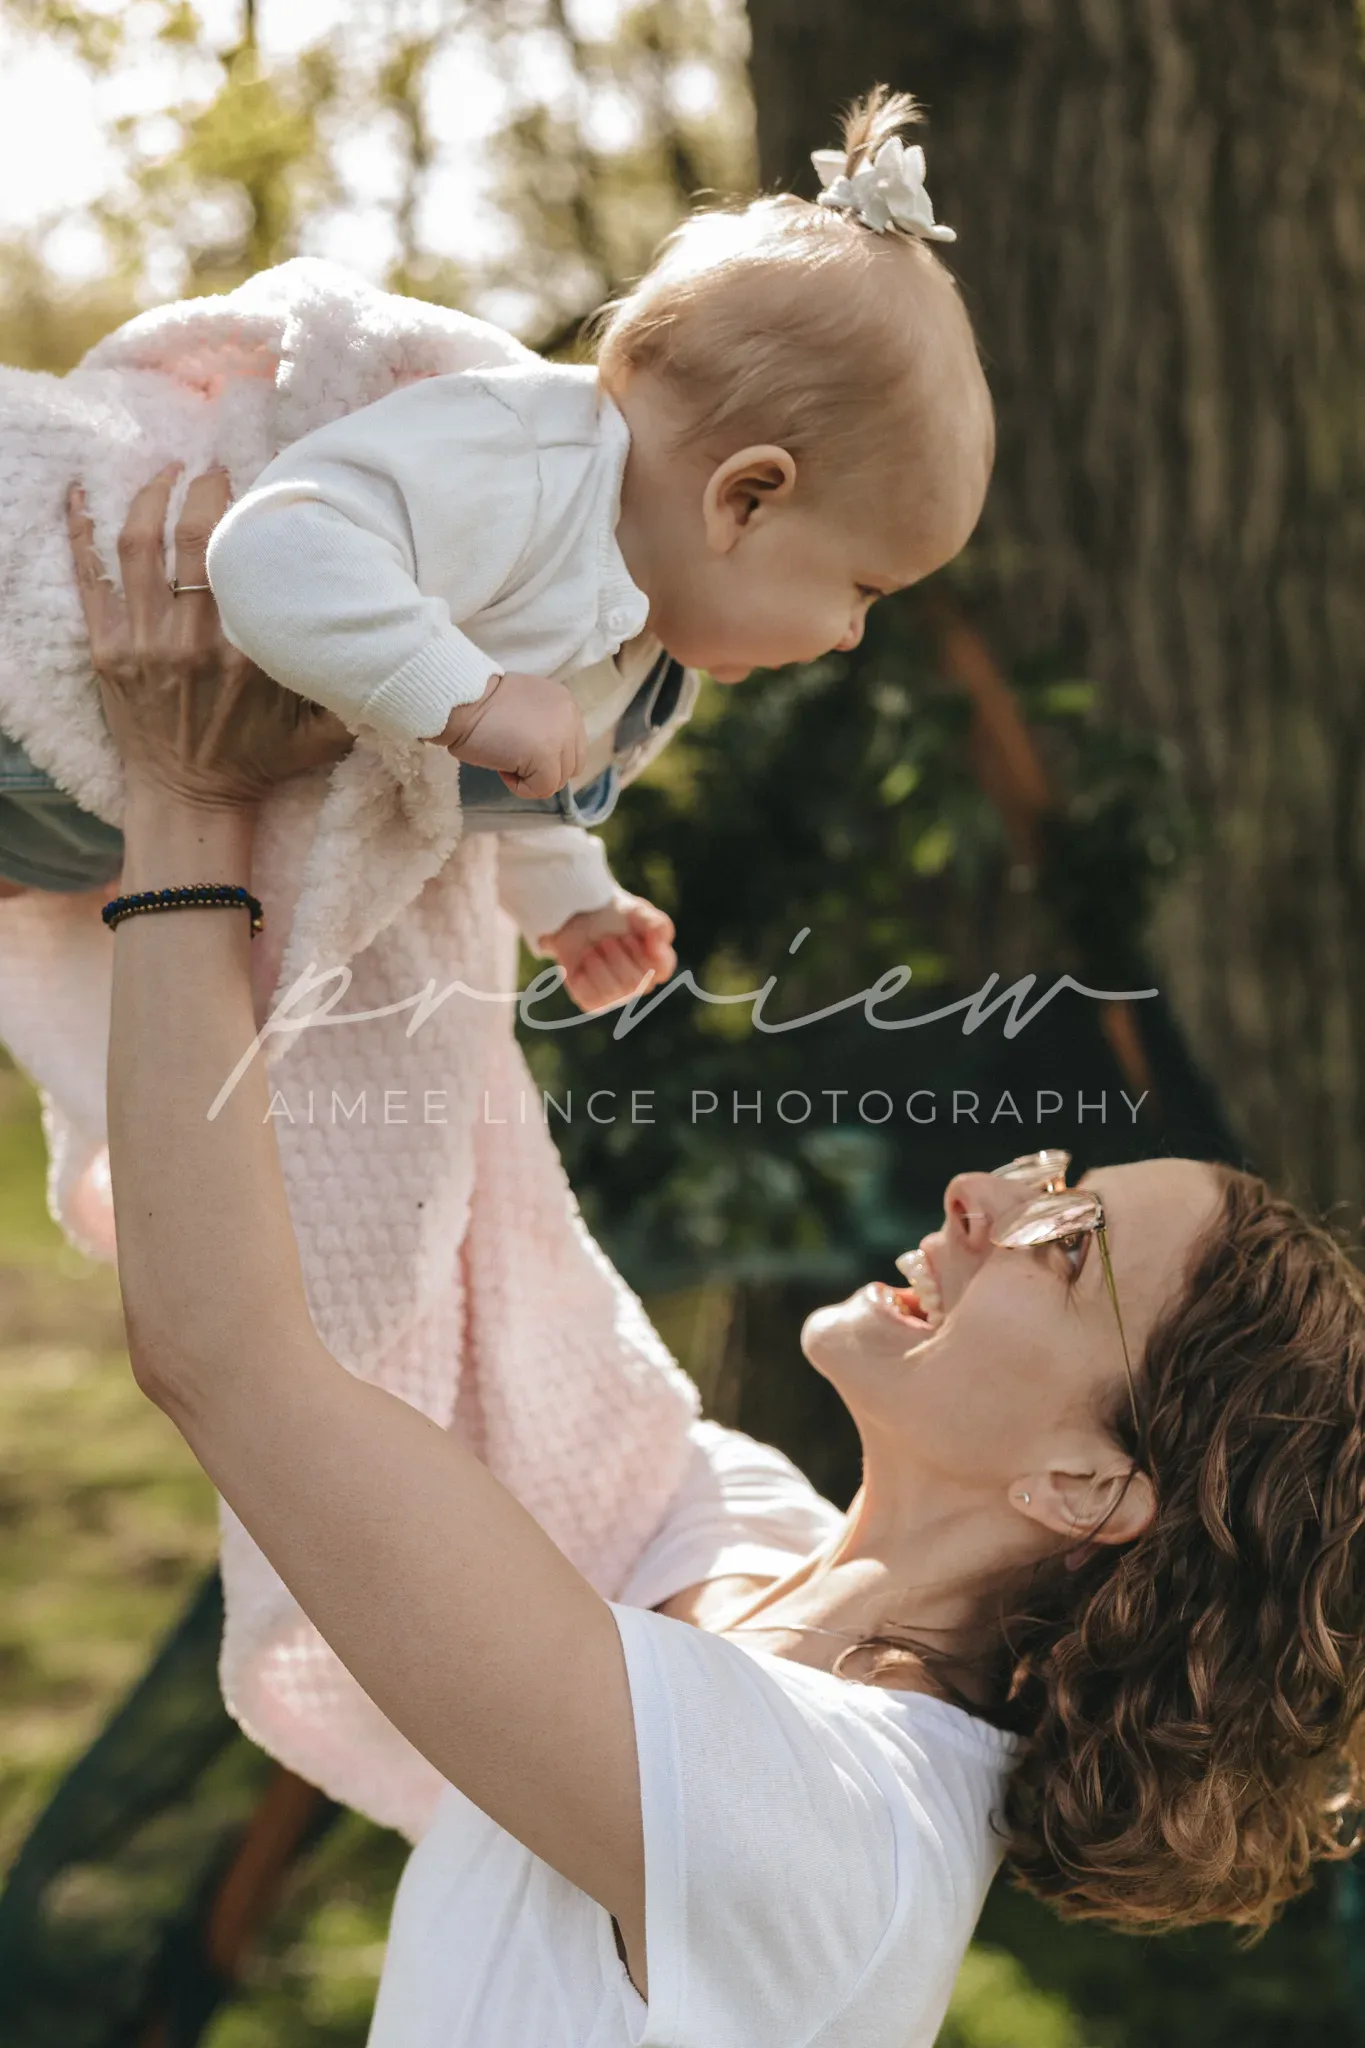 A joyful woman in a white shirt lifts a baby wearing a light pink outfit and a white bow headband above her head in a sunny, leafy park setting. the baby looks delighted and the woman is smiling broadly at the baby.